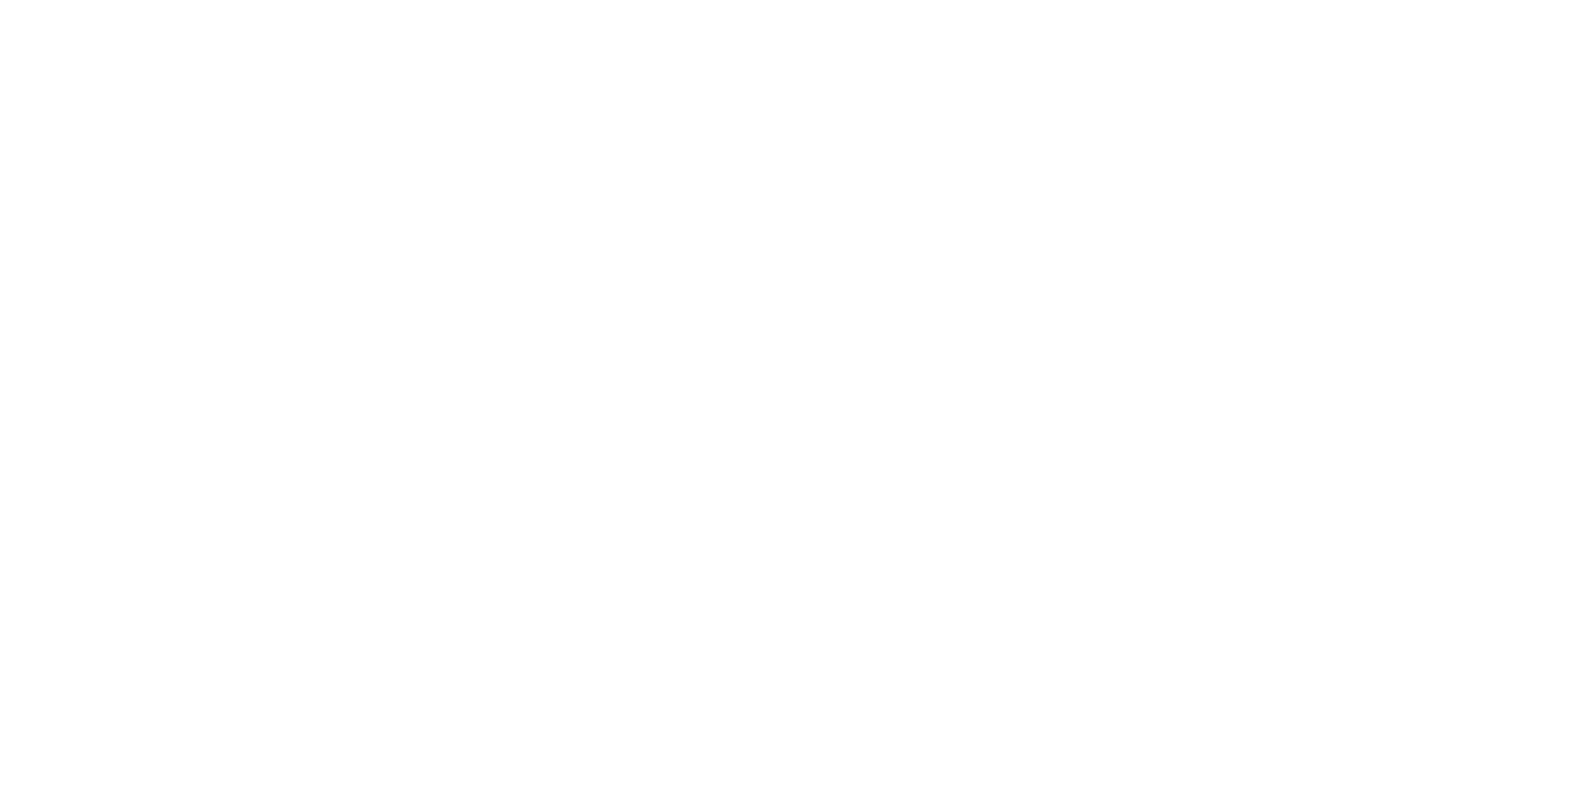 Release Number